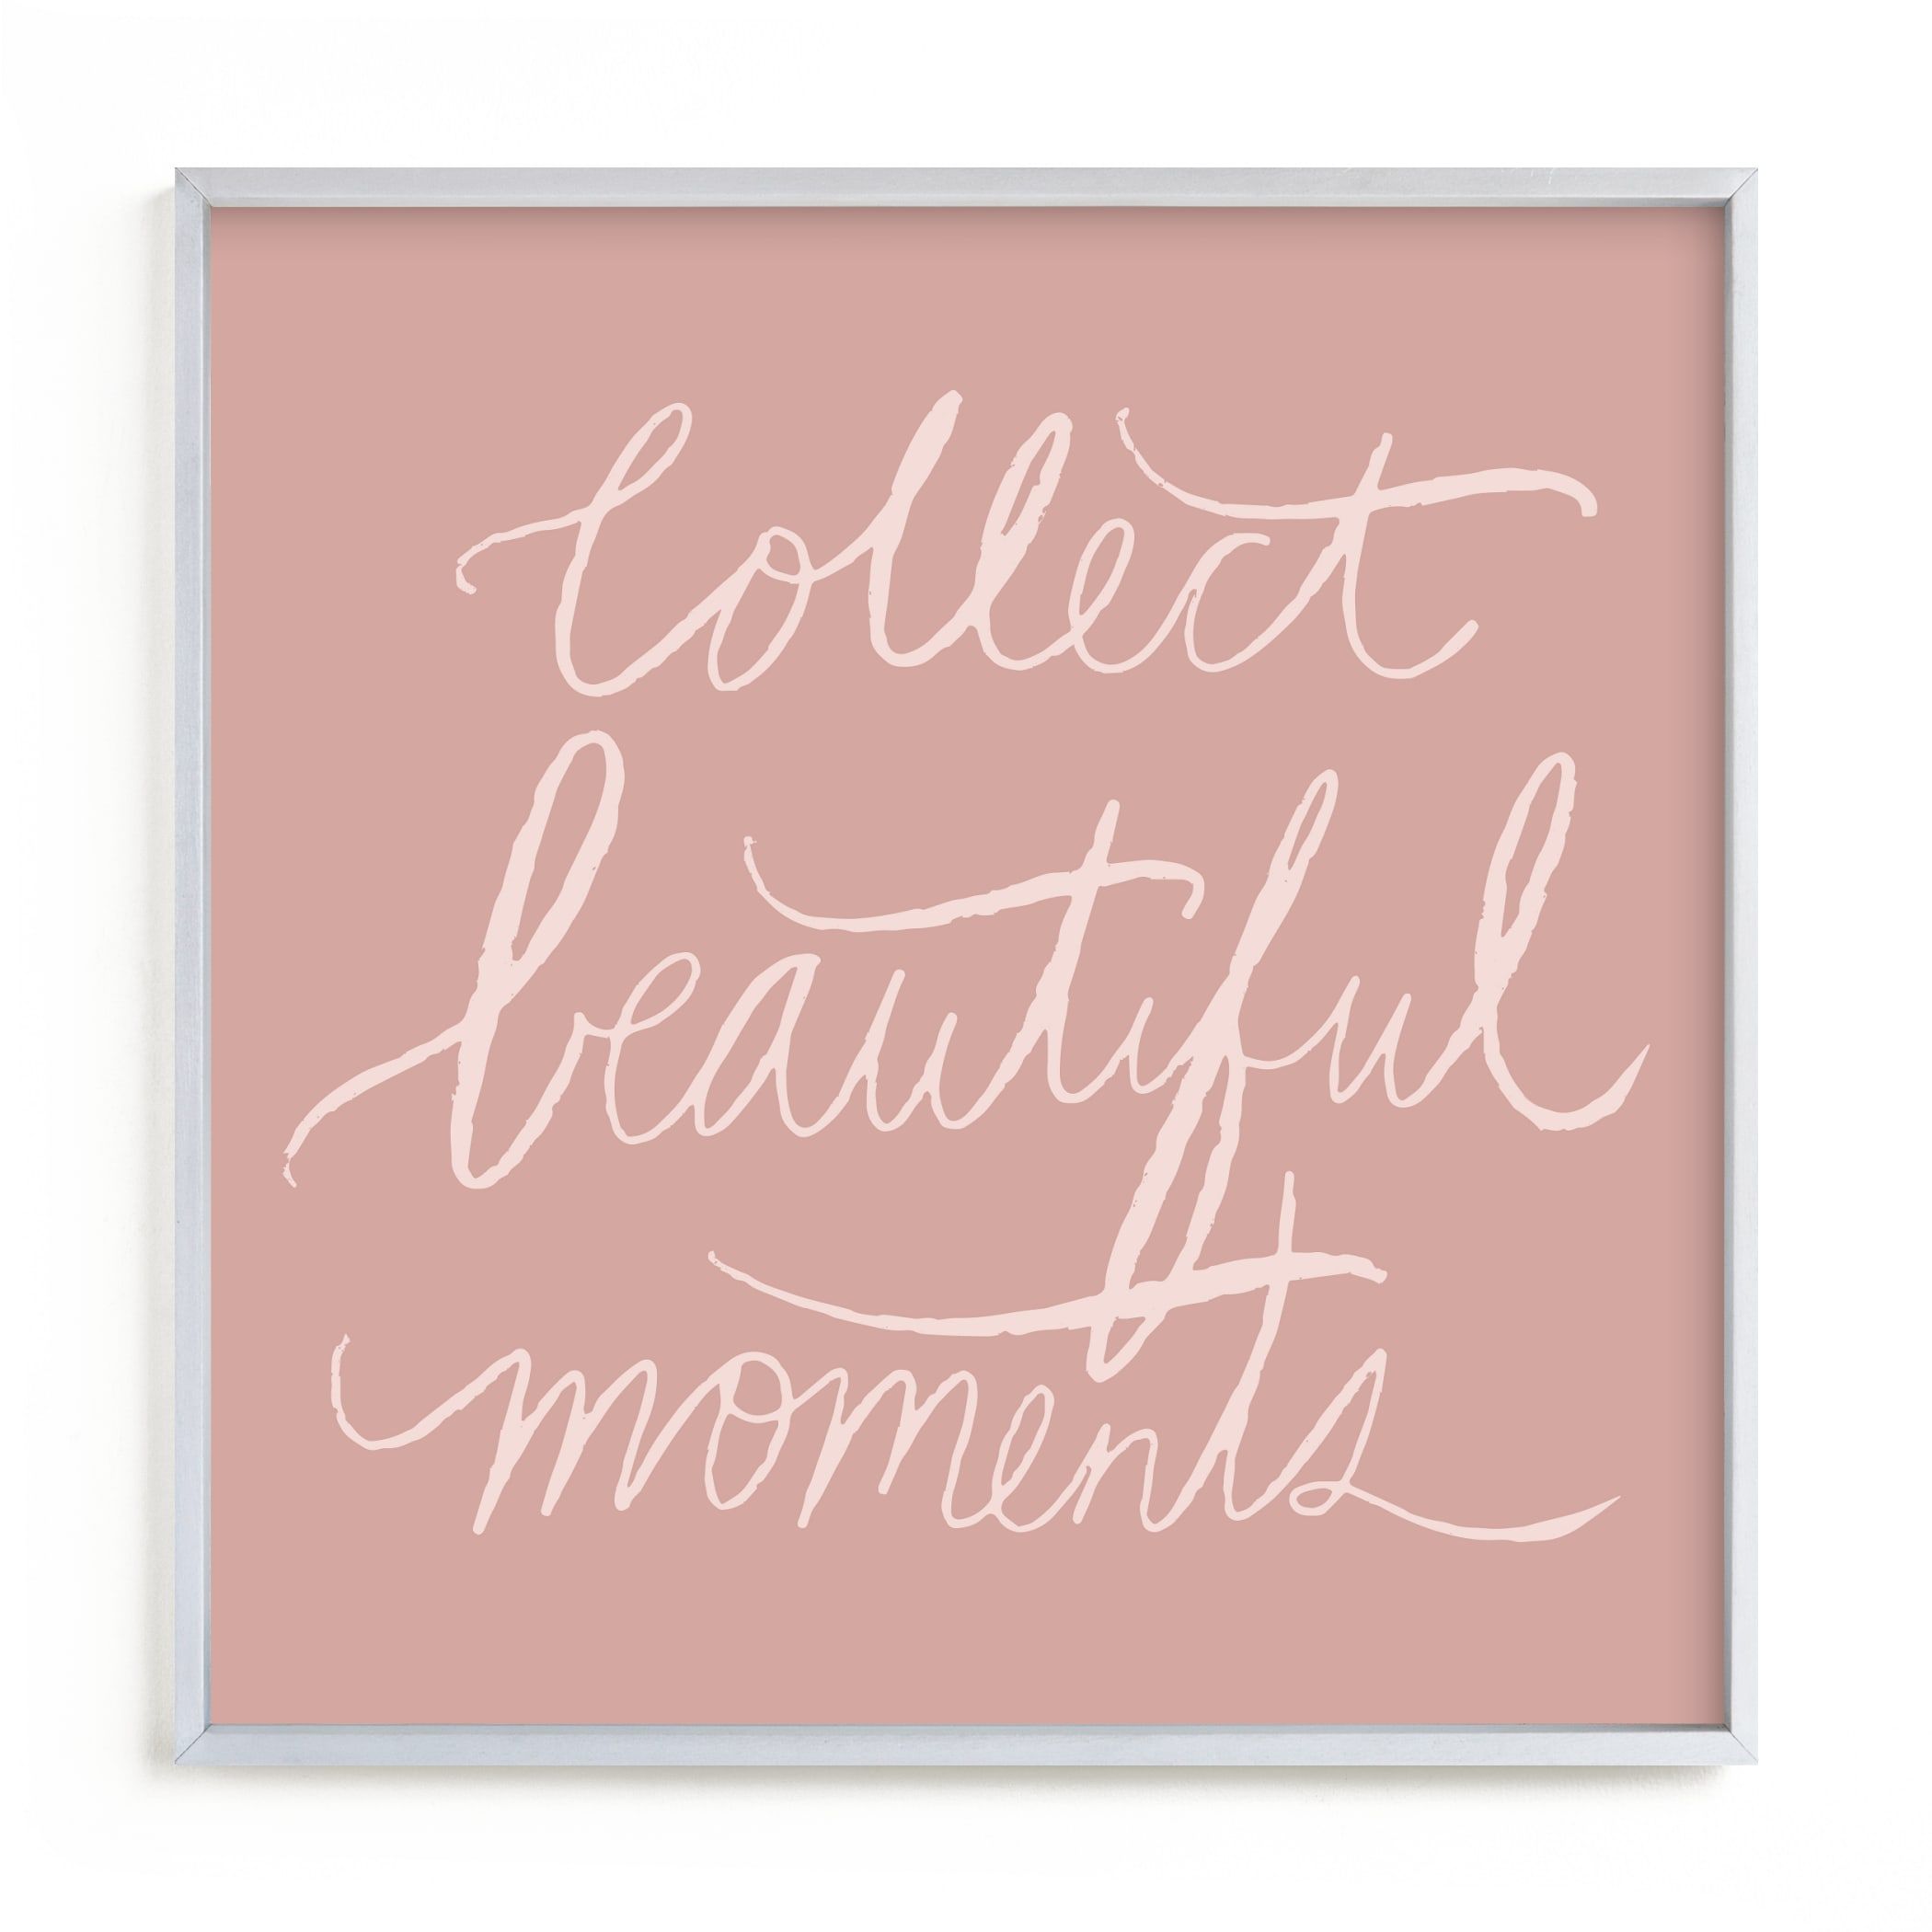 collect beautiful moments | Minted